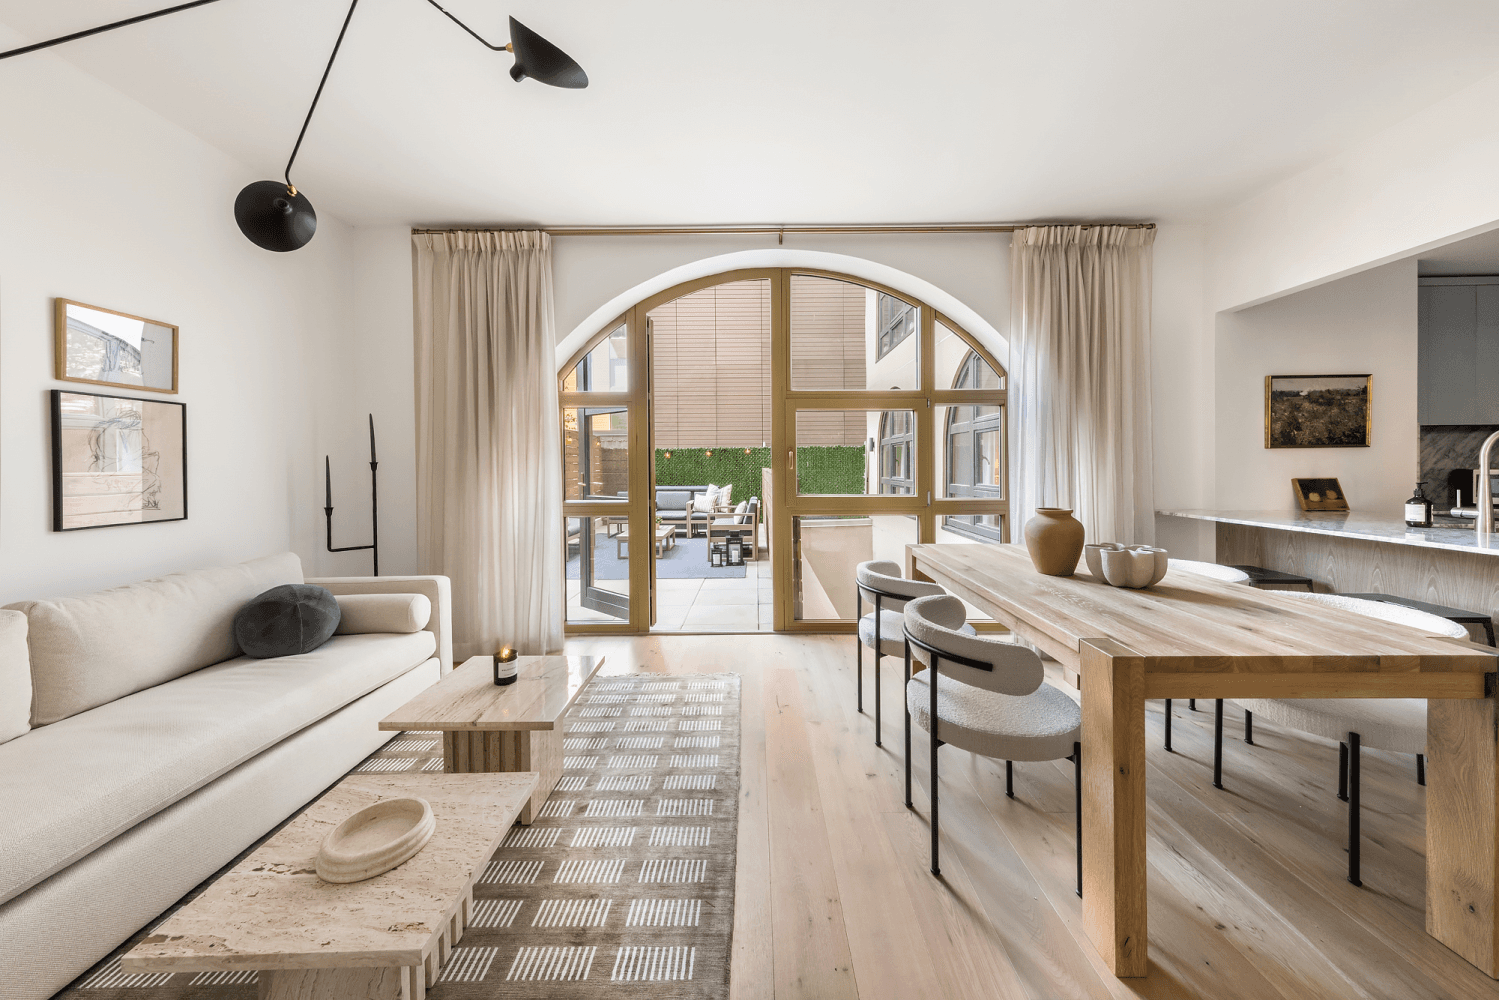 Upon entering this duplex unit, you're greeted by stunning oversized arched windows leading to your private terrace perfect for entertaining and maximum relaxation.